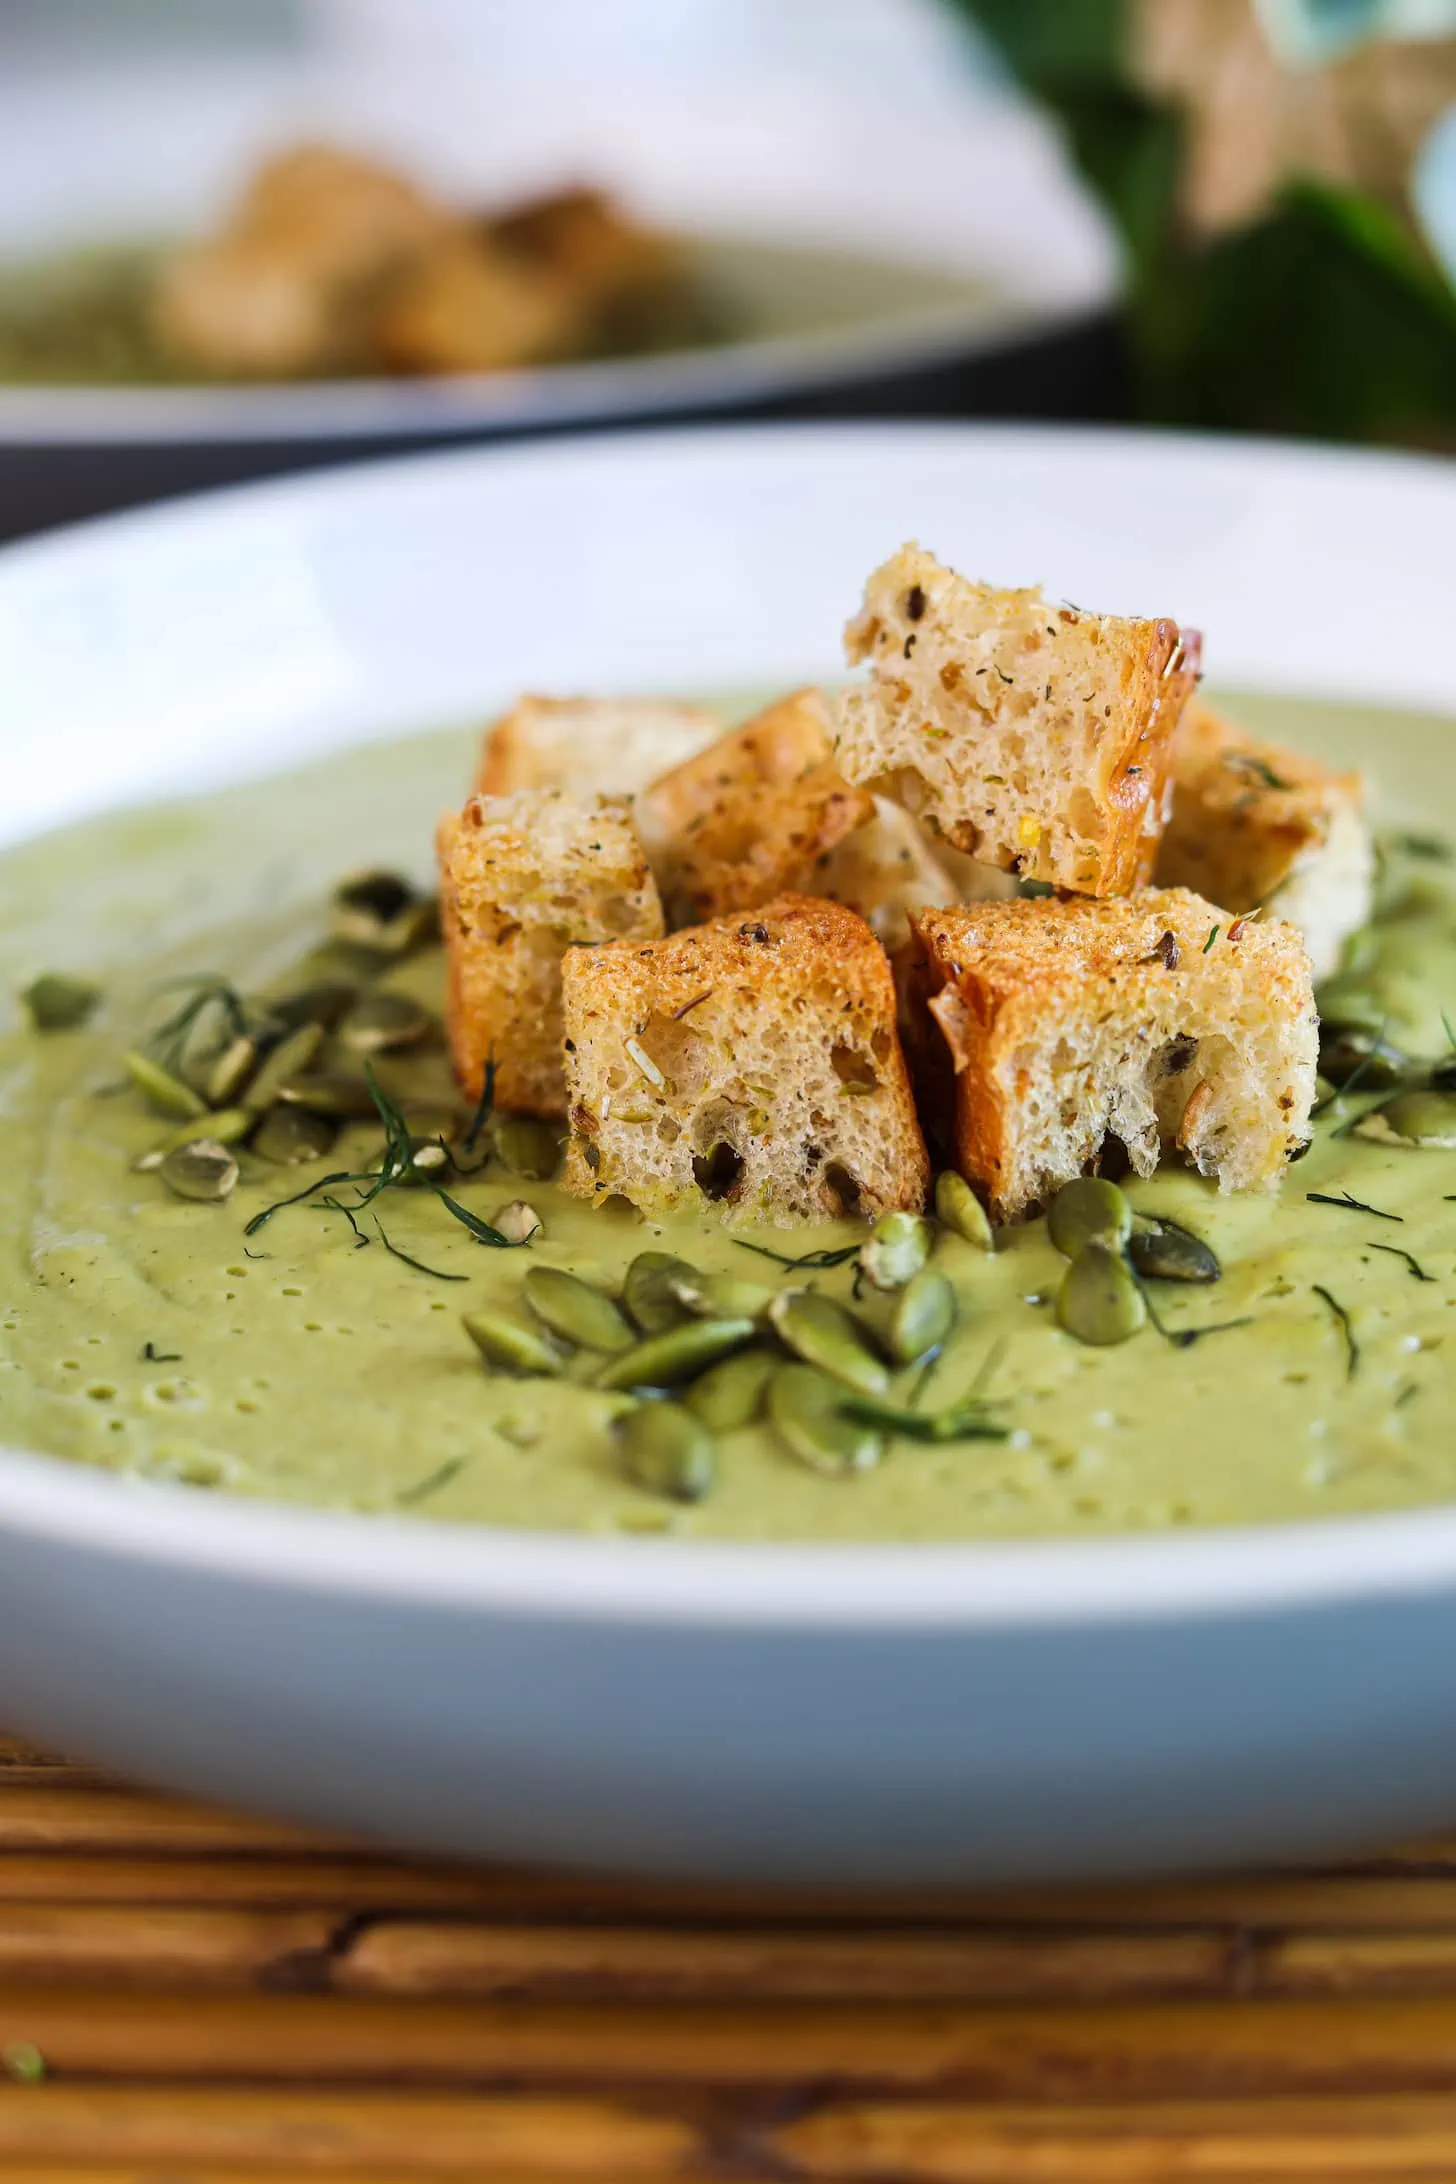 Perspective image of a heap of croutons on green soup.